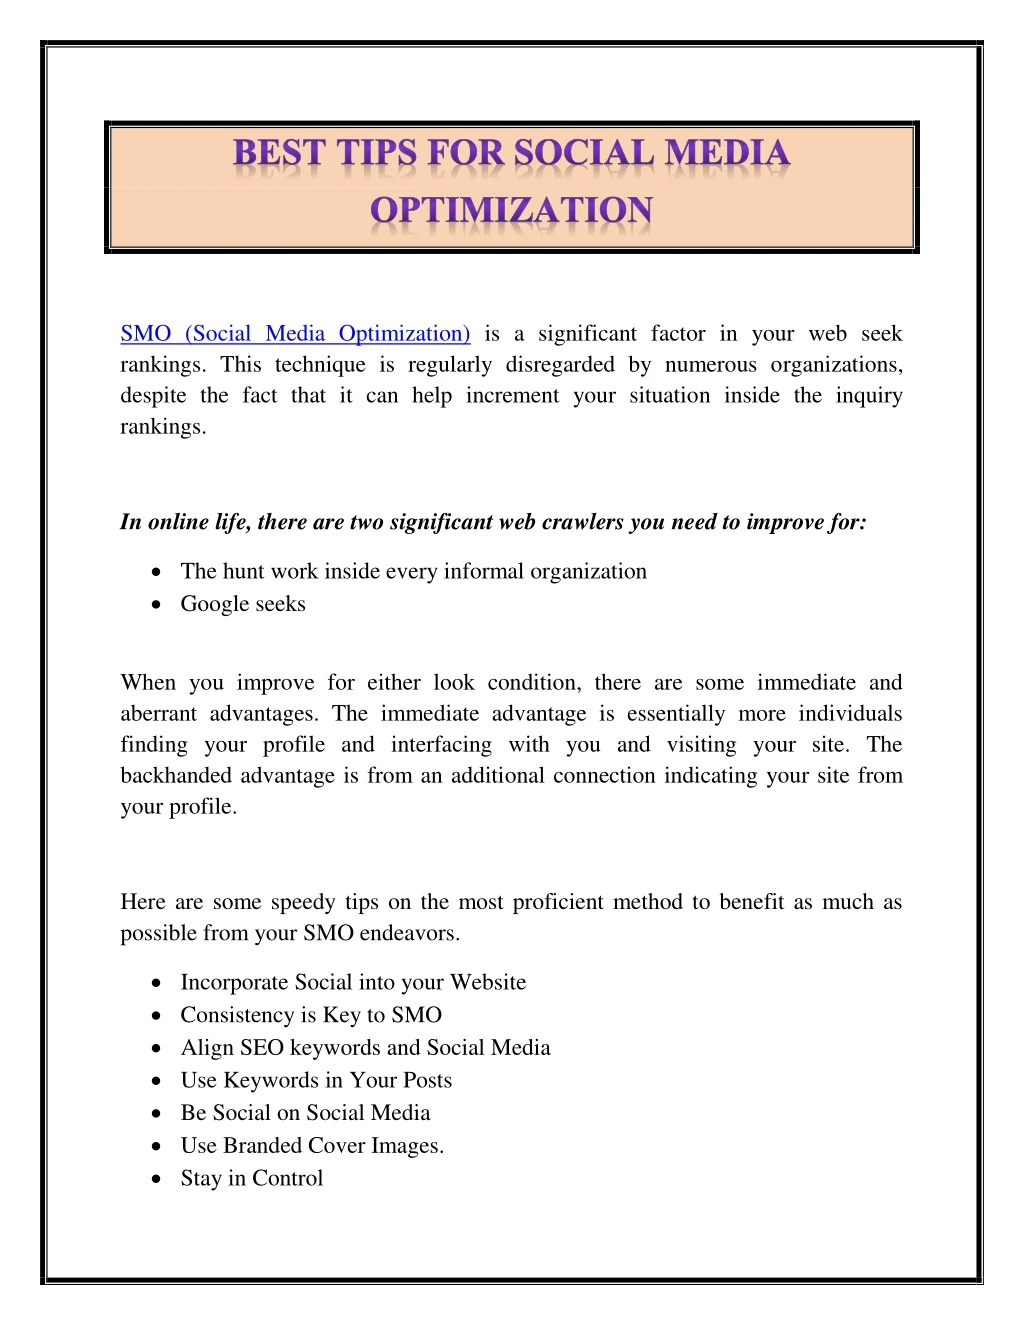 smo social media optimization is a significant